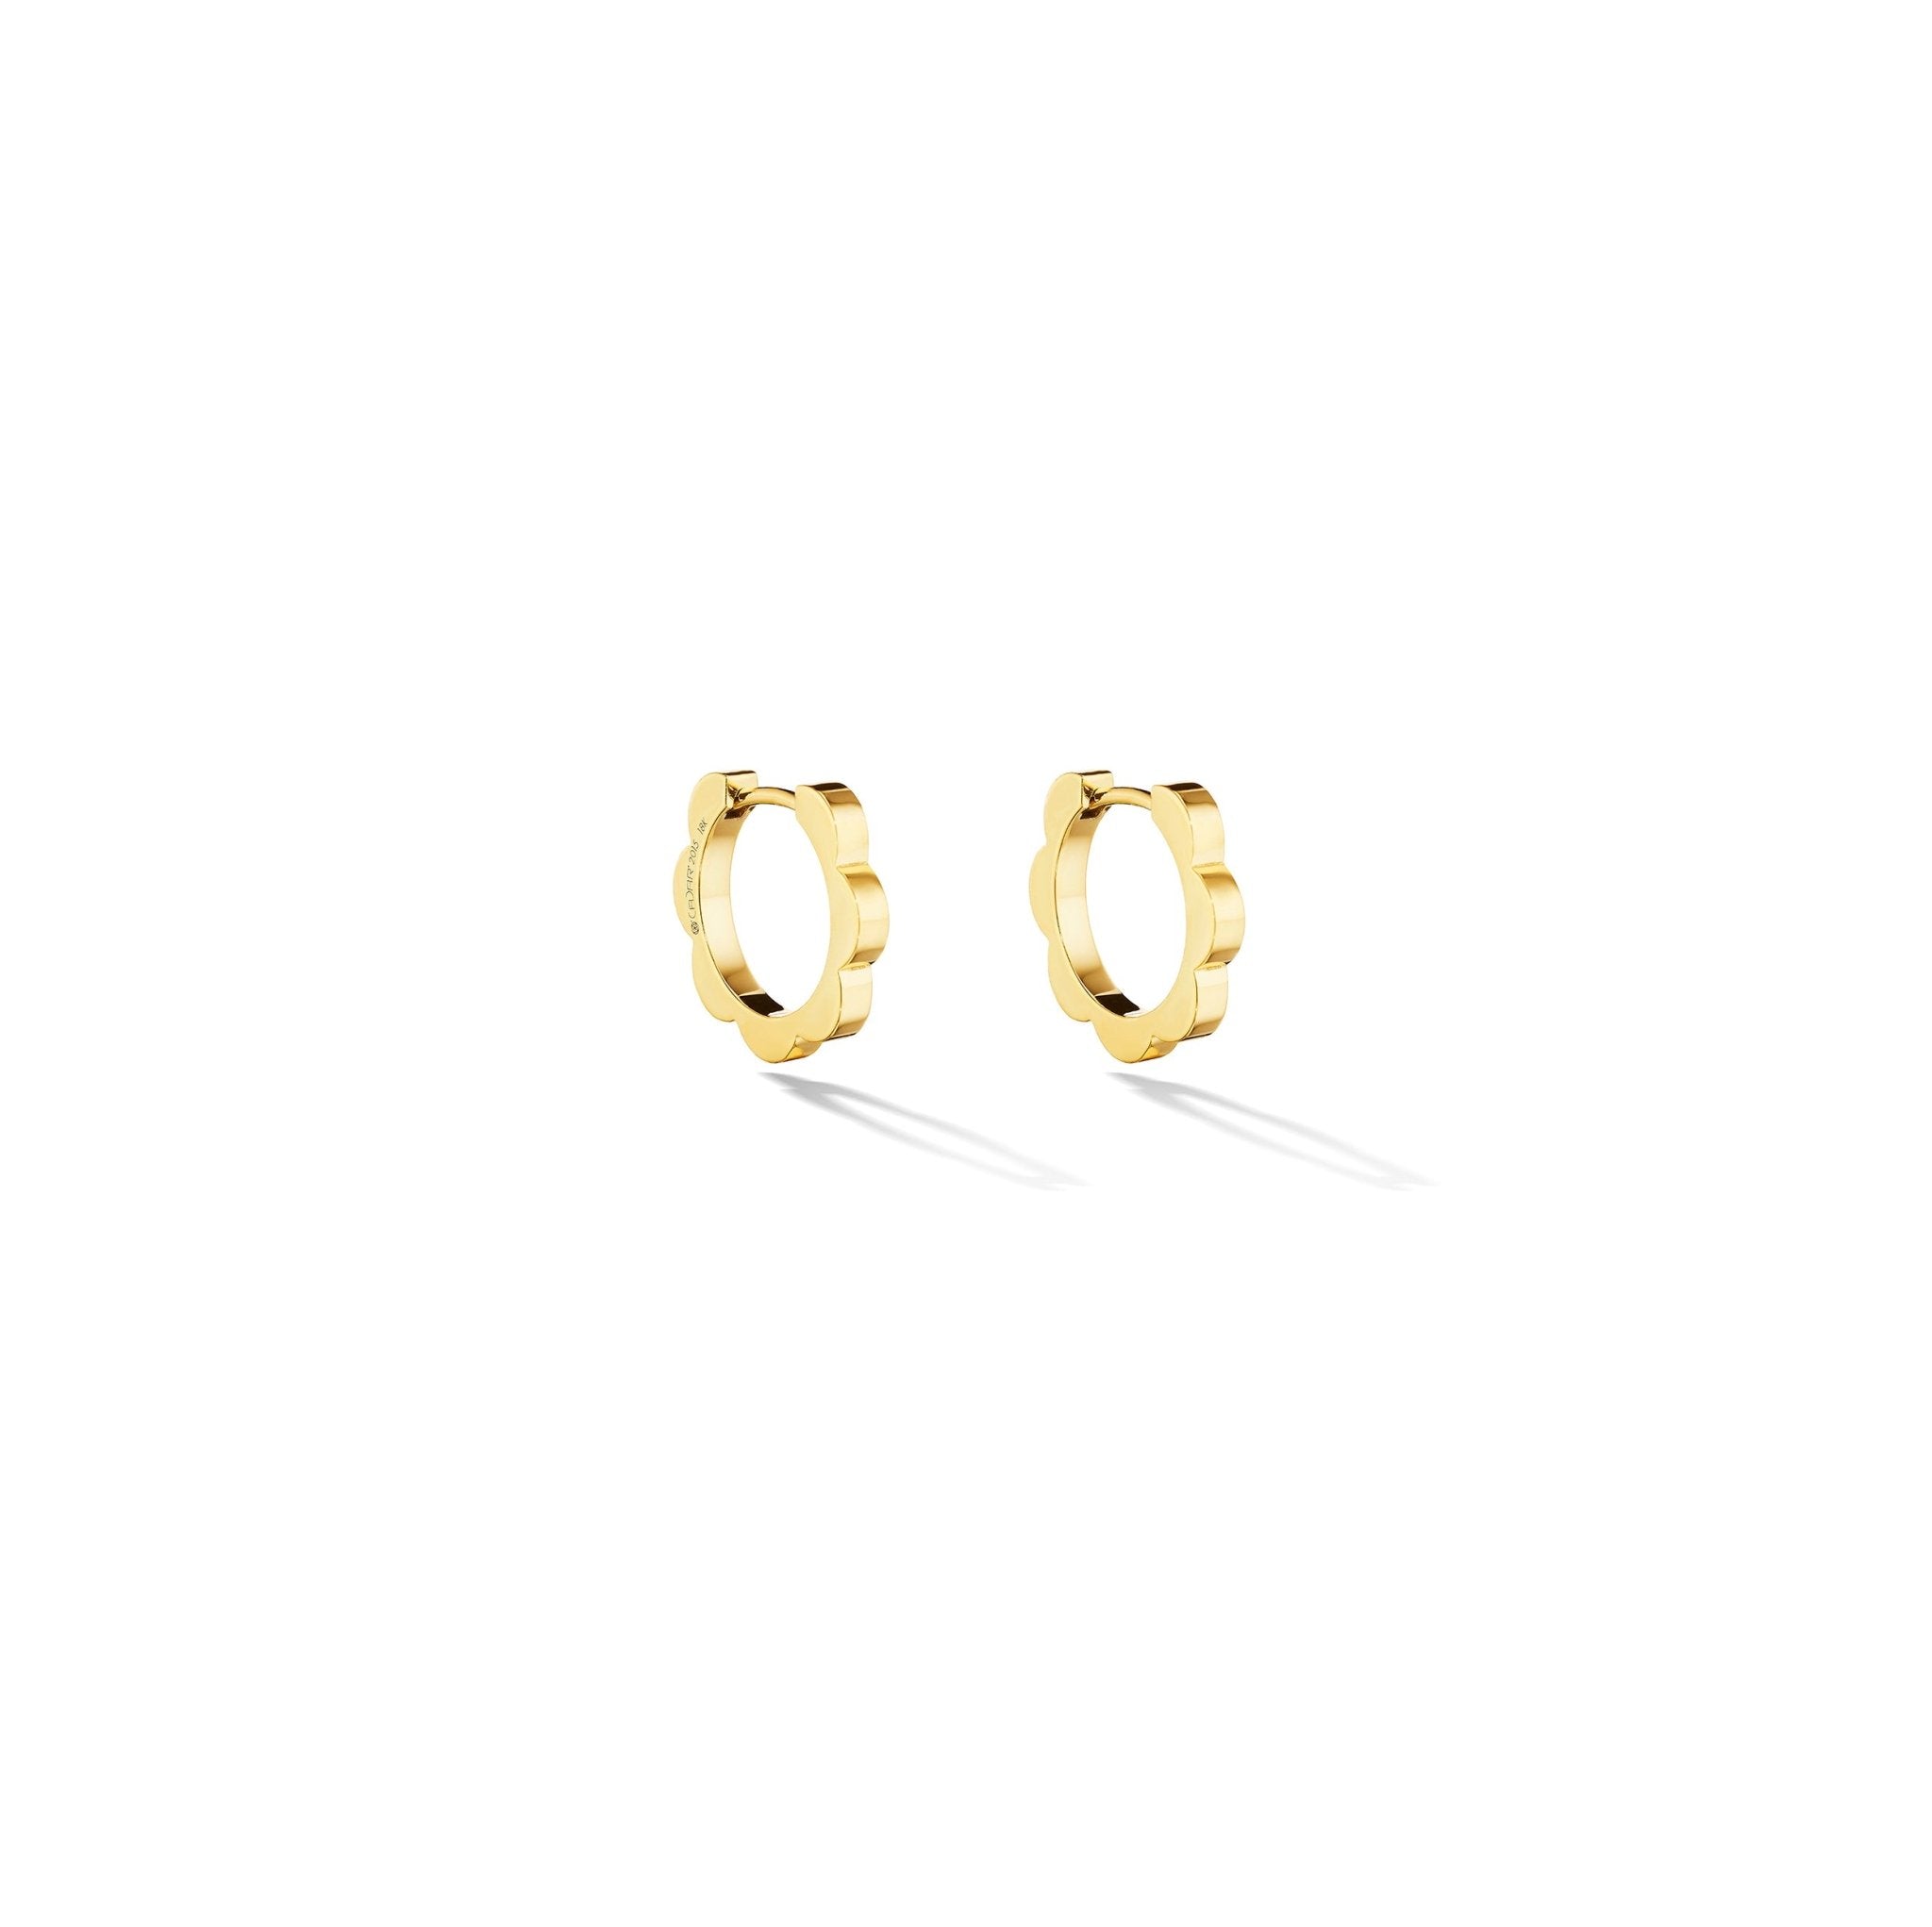 Buy Cute Small Size Gold Design White Stone Round Shape Bali Earrings for  Kids Girl